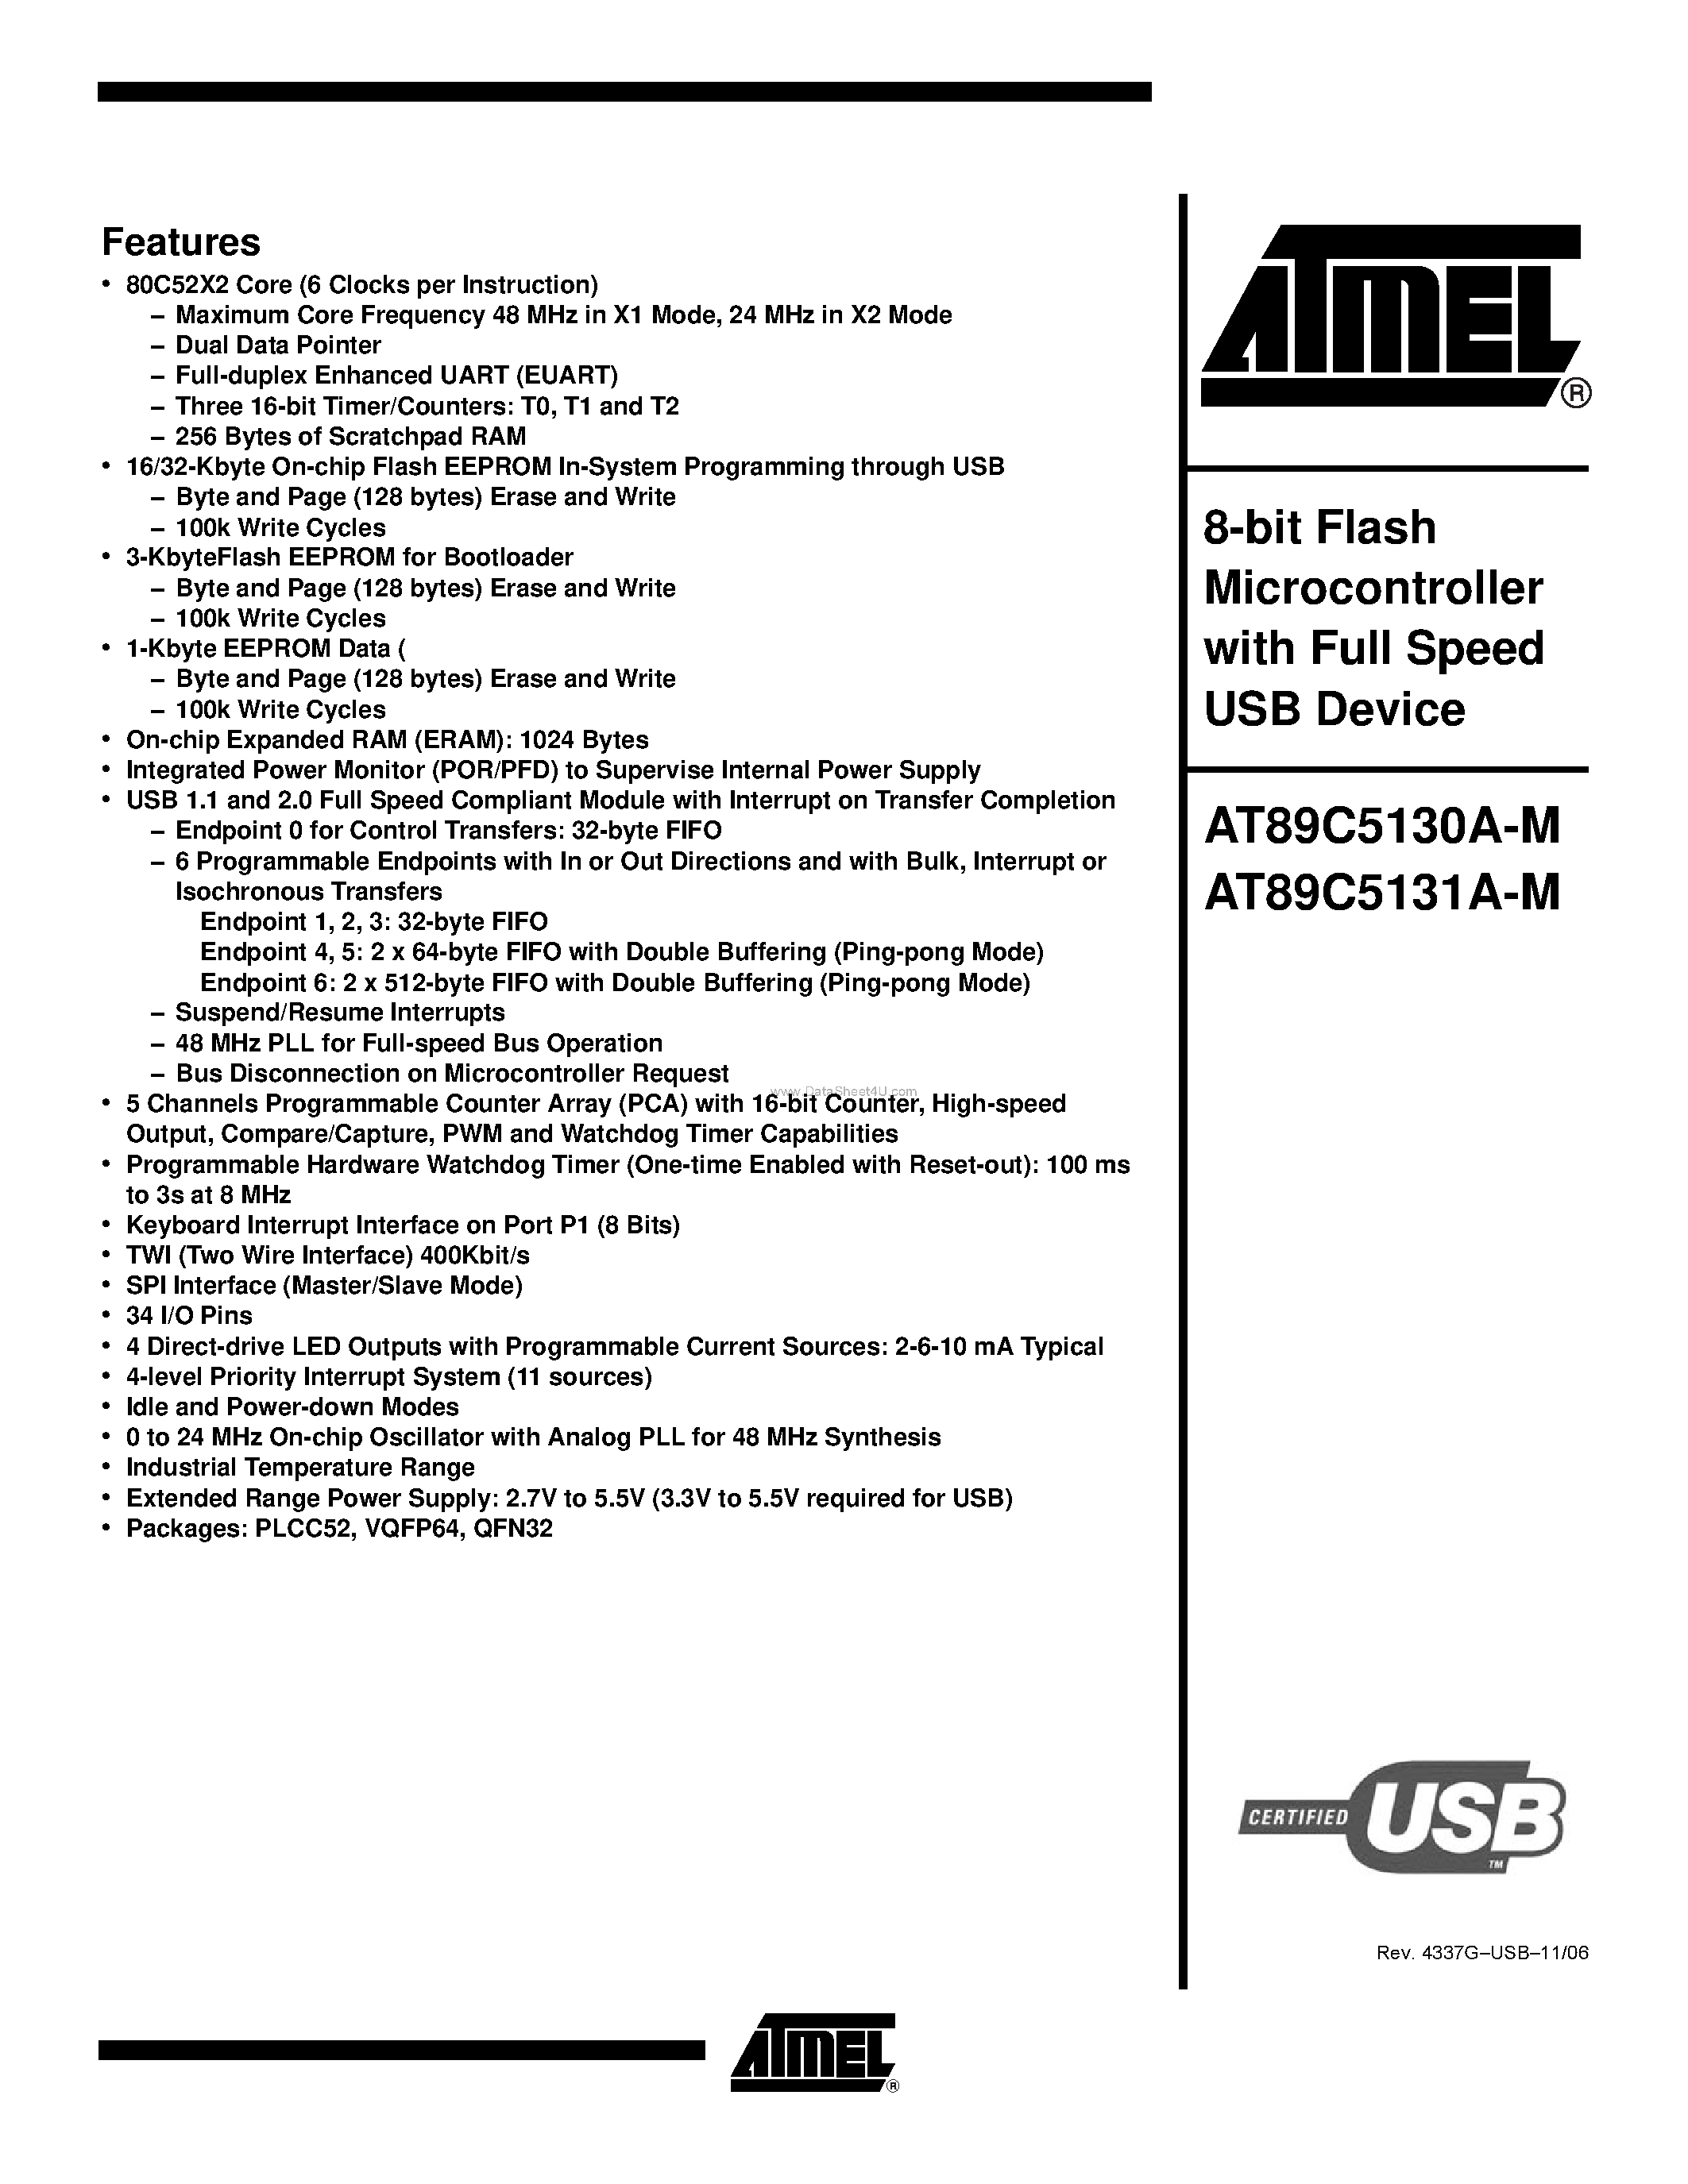 Datasheet AT89C5130A-M - (AT89C5130A-M / AT89C5131A-M) 8-bit Flash Microcontroller page 1